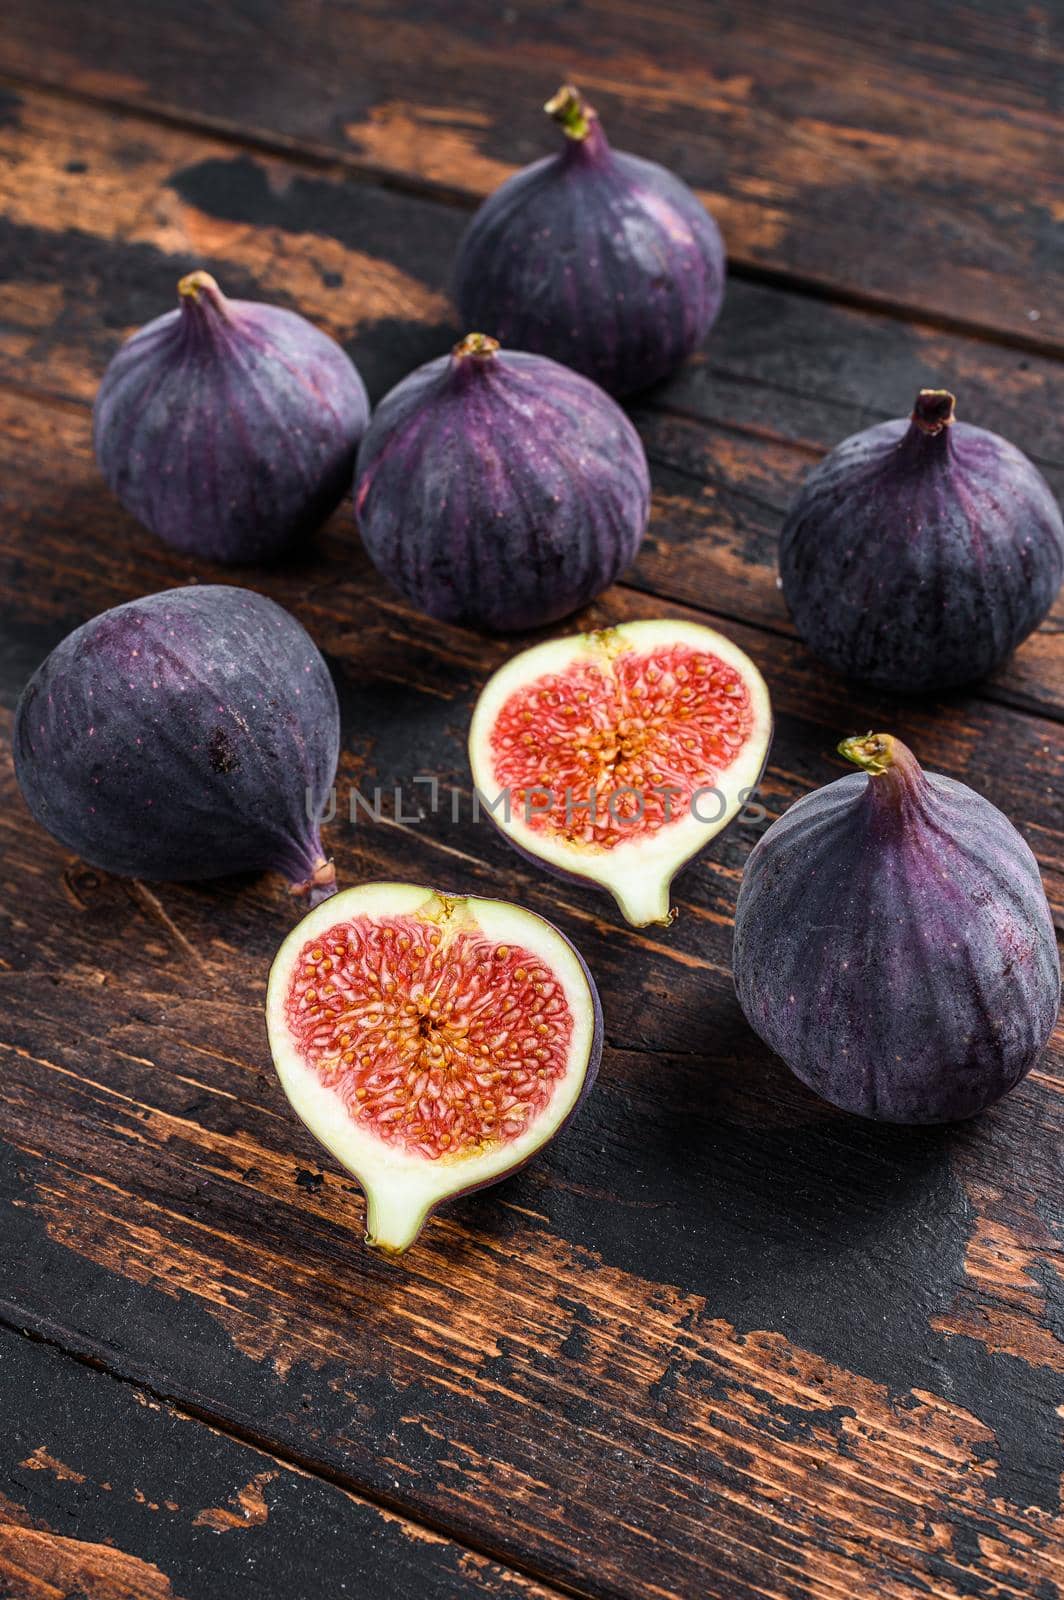 Purple figs on a wooden table. Dark wooden background. Top view by Composter